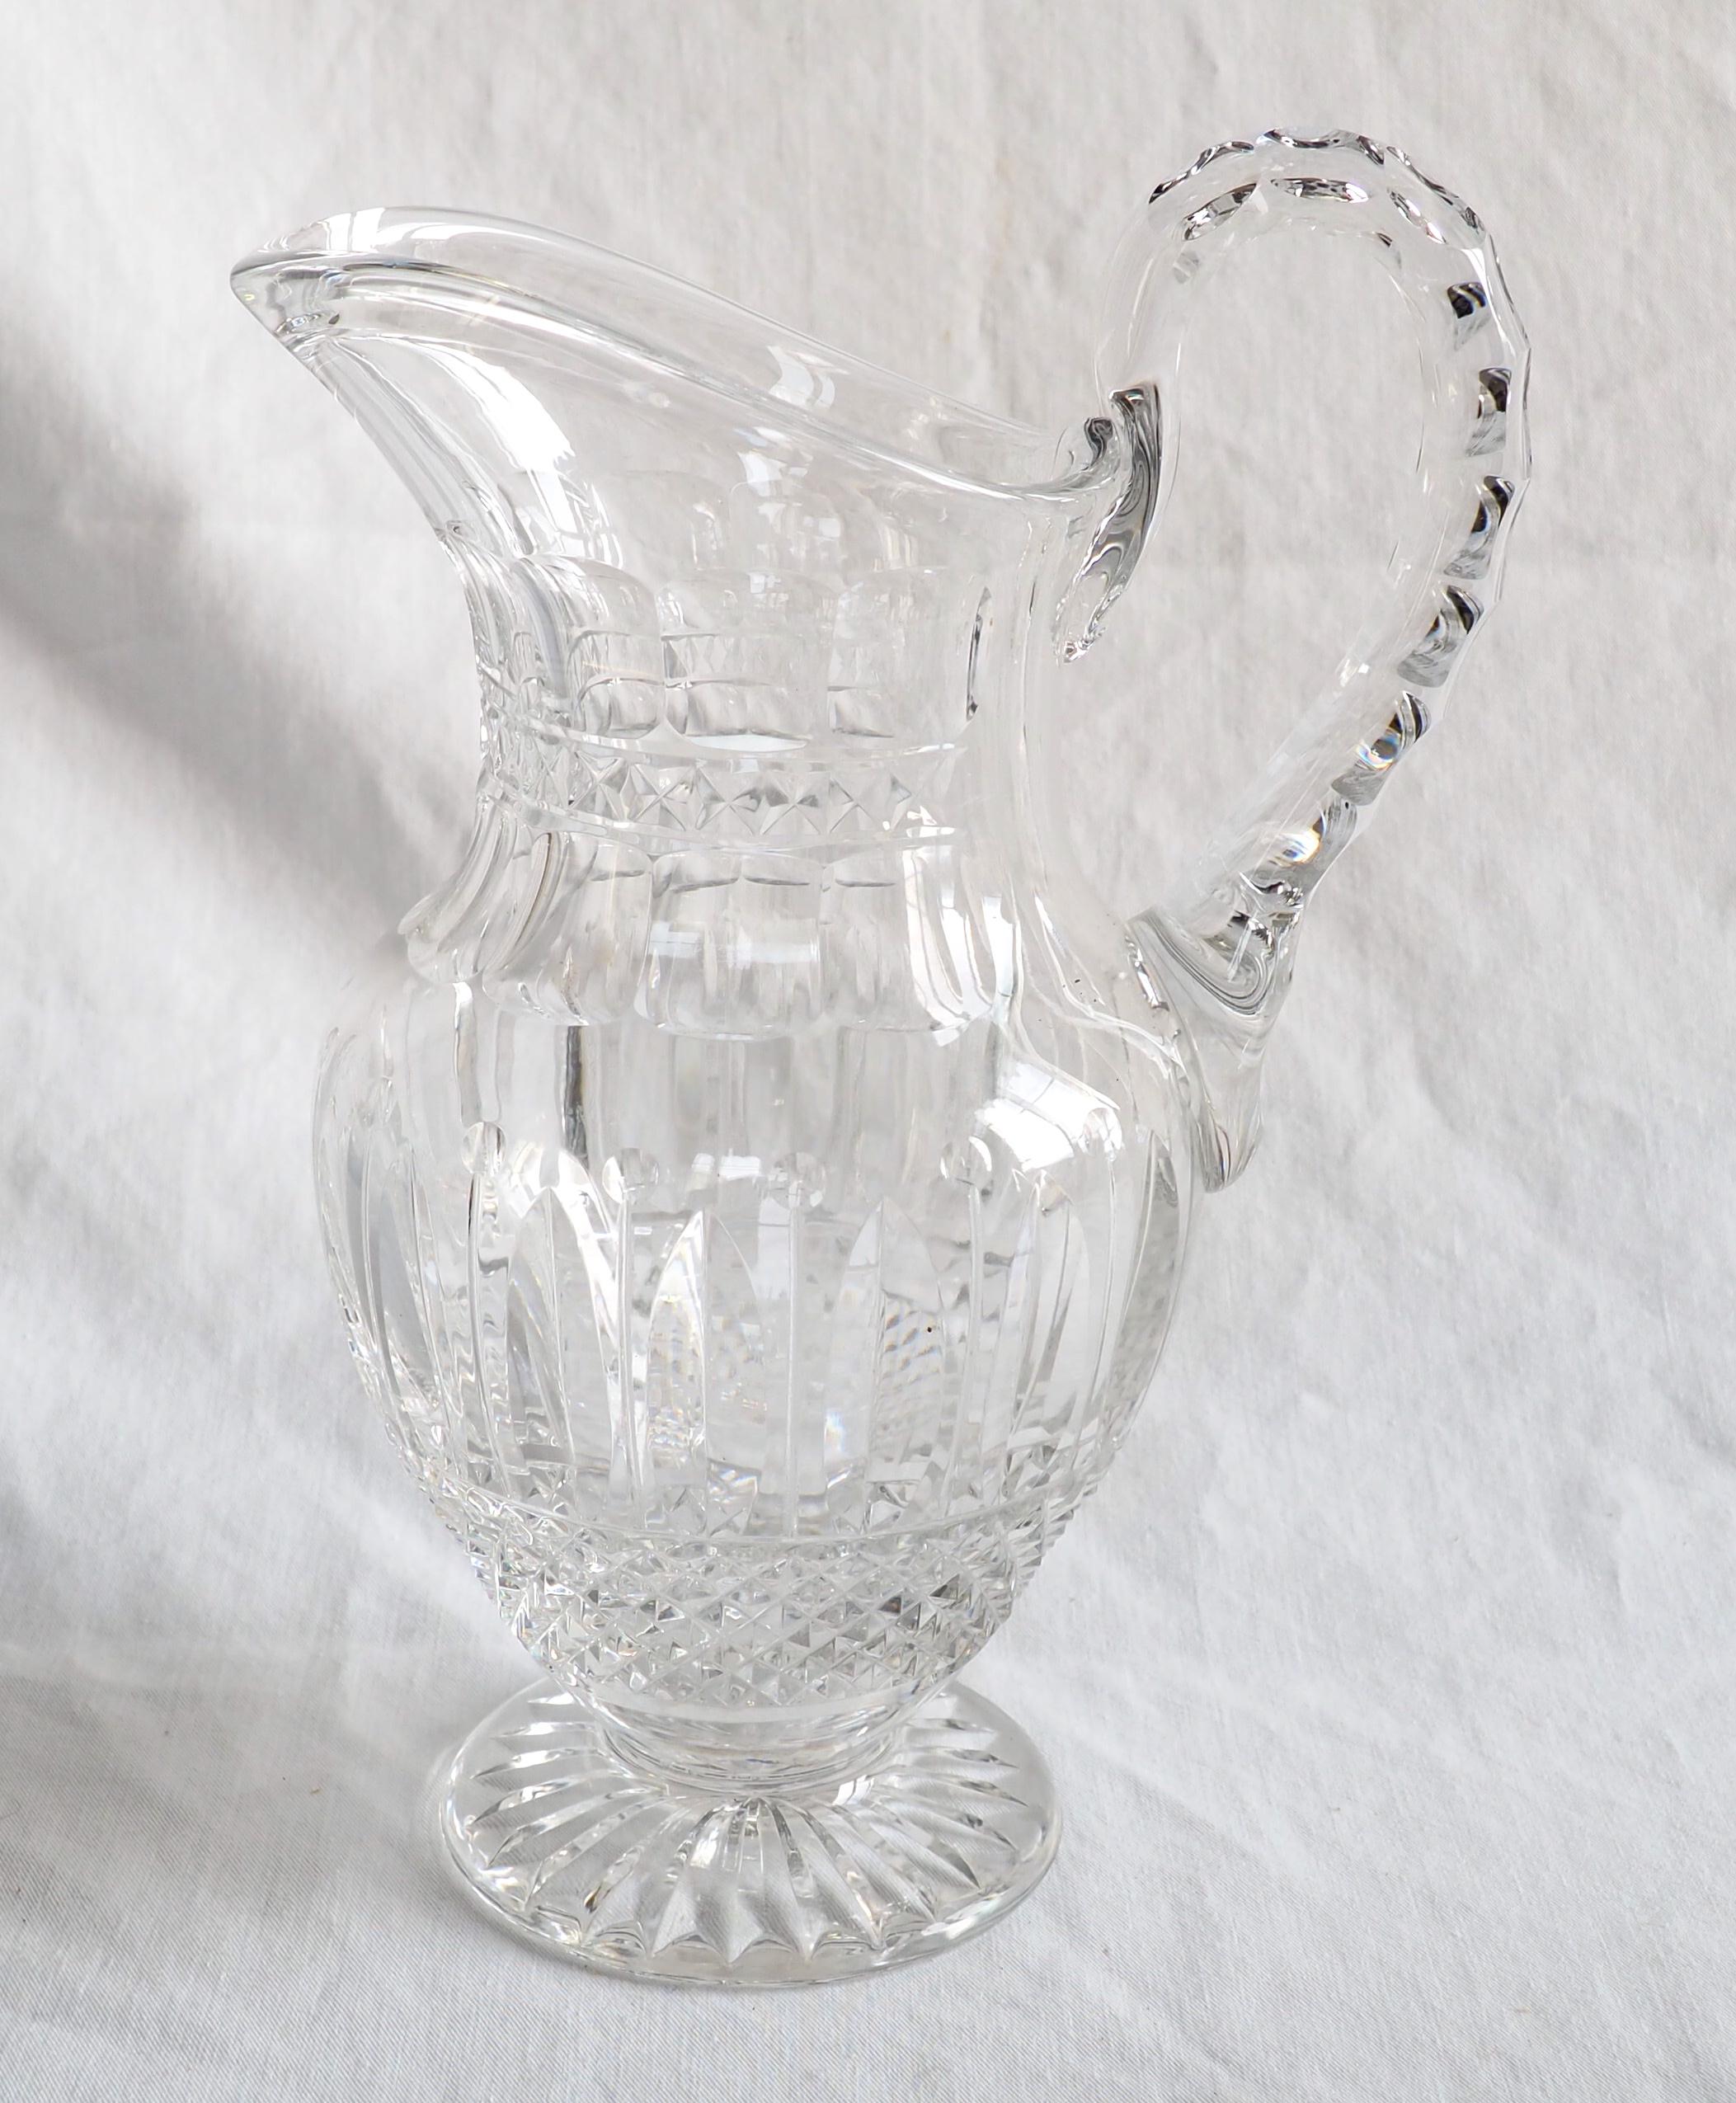 St Louis crystal water pitcher / ewer, Tommy pattern.
Tommy is one of the most successful models of French crystal maker St Louis. Iconic, much refined cut pattern, symbolic of St Louis crystal manufacture savoir-faire and refinement.
Our piece is